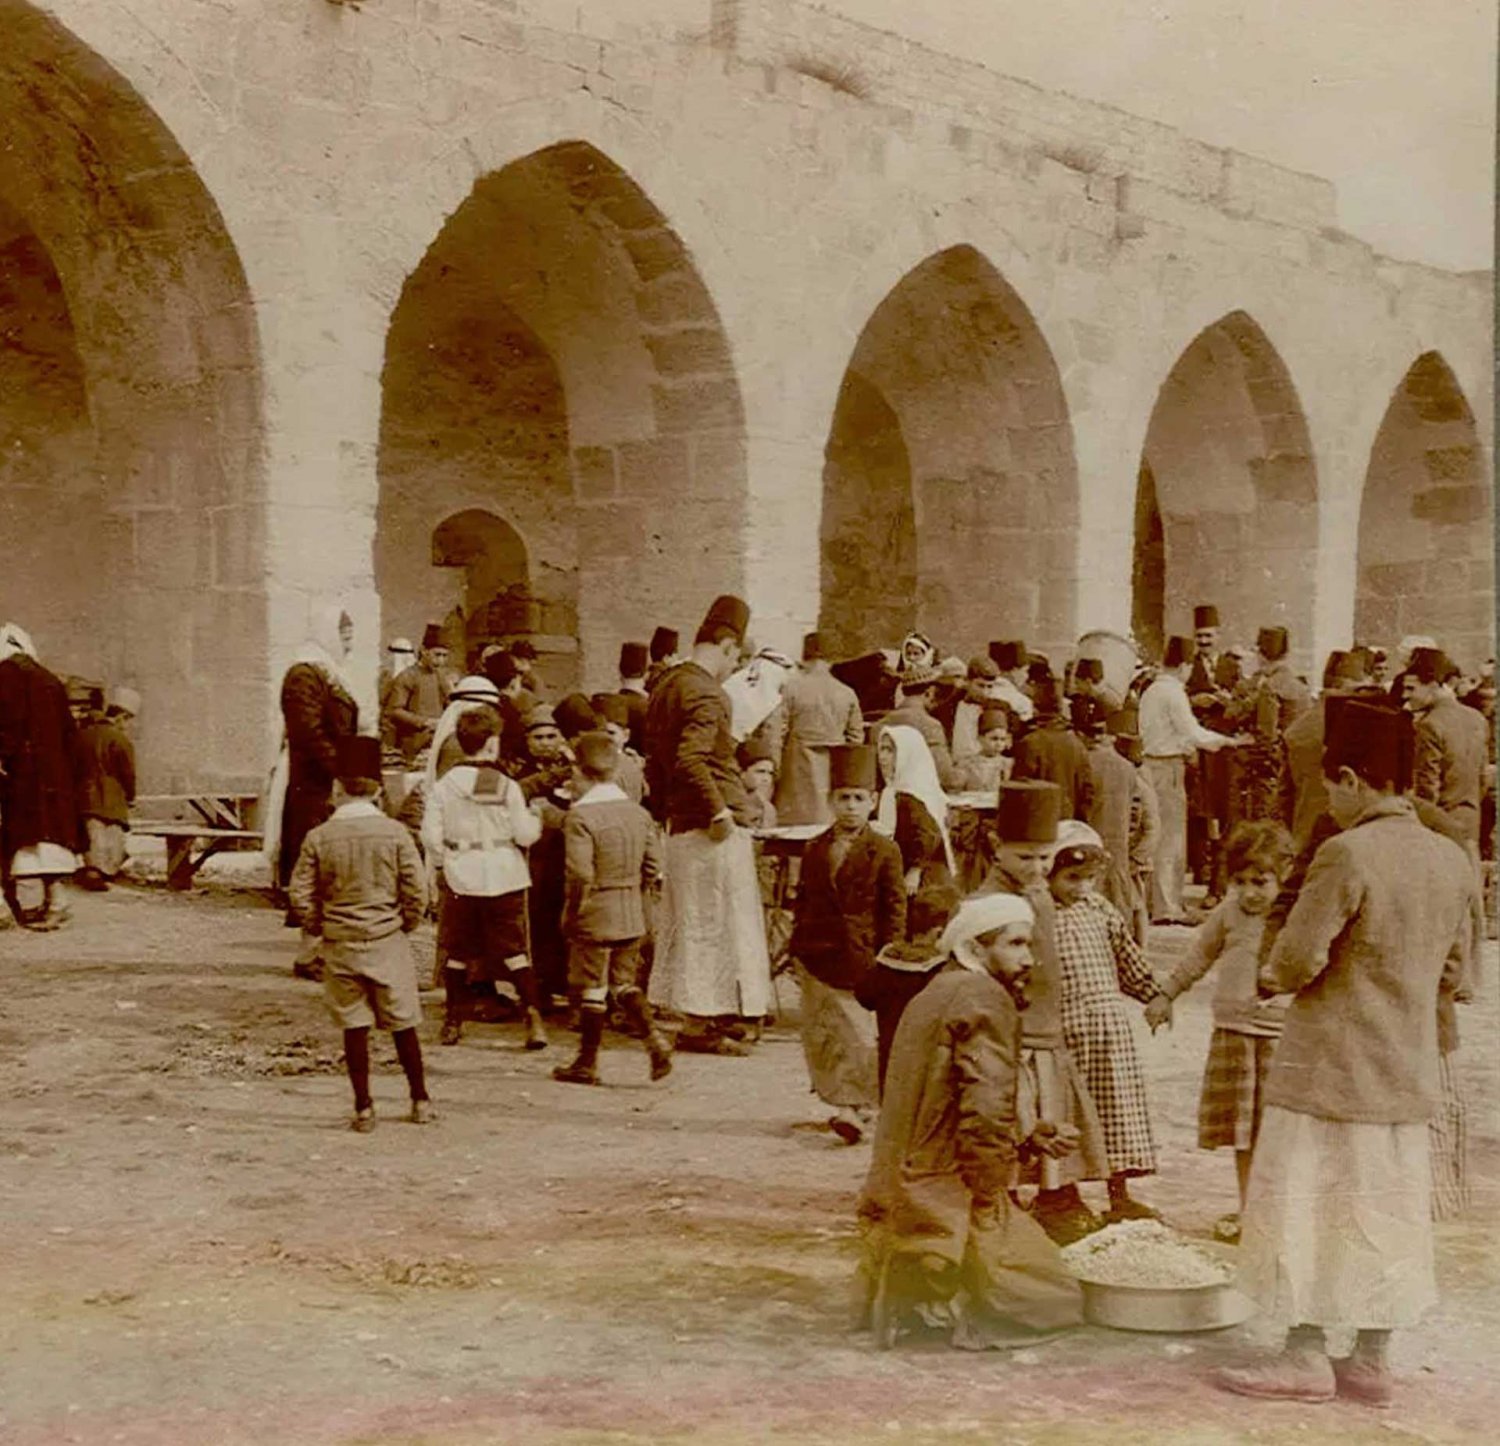 Eid al-Adha celebration at the Dome of the Rock in Jerusalem, 1907